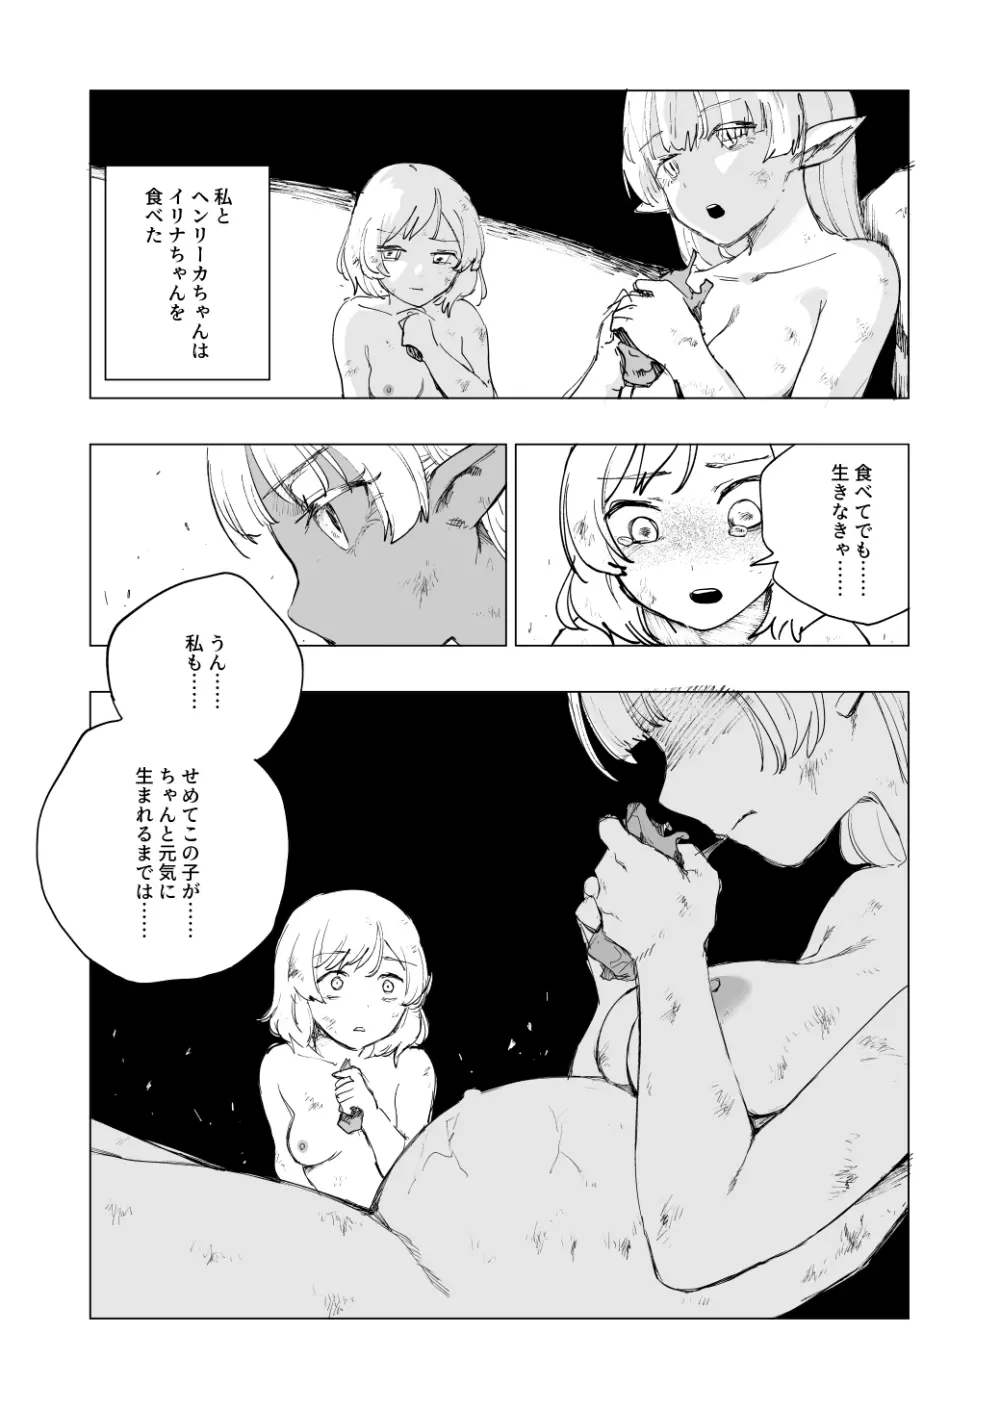 『Lv.1』 第3話 - page3